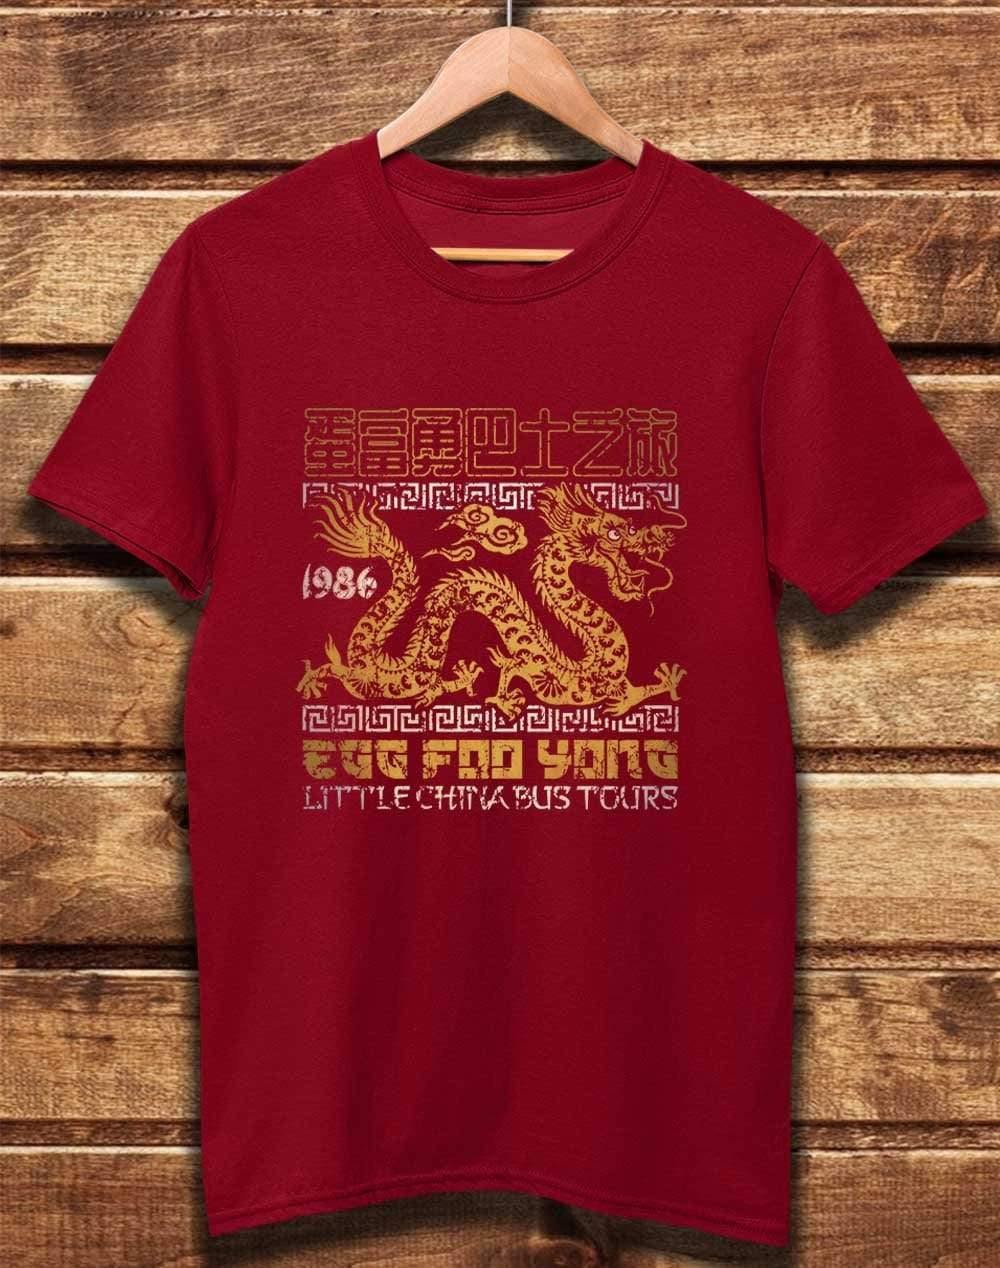 DELUXE Egg Foo Yong Bus Tours Organic Cotton T-Shirt XS / Dark Red  - Off World Tees